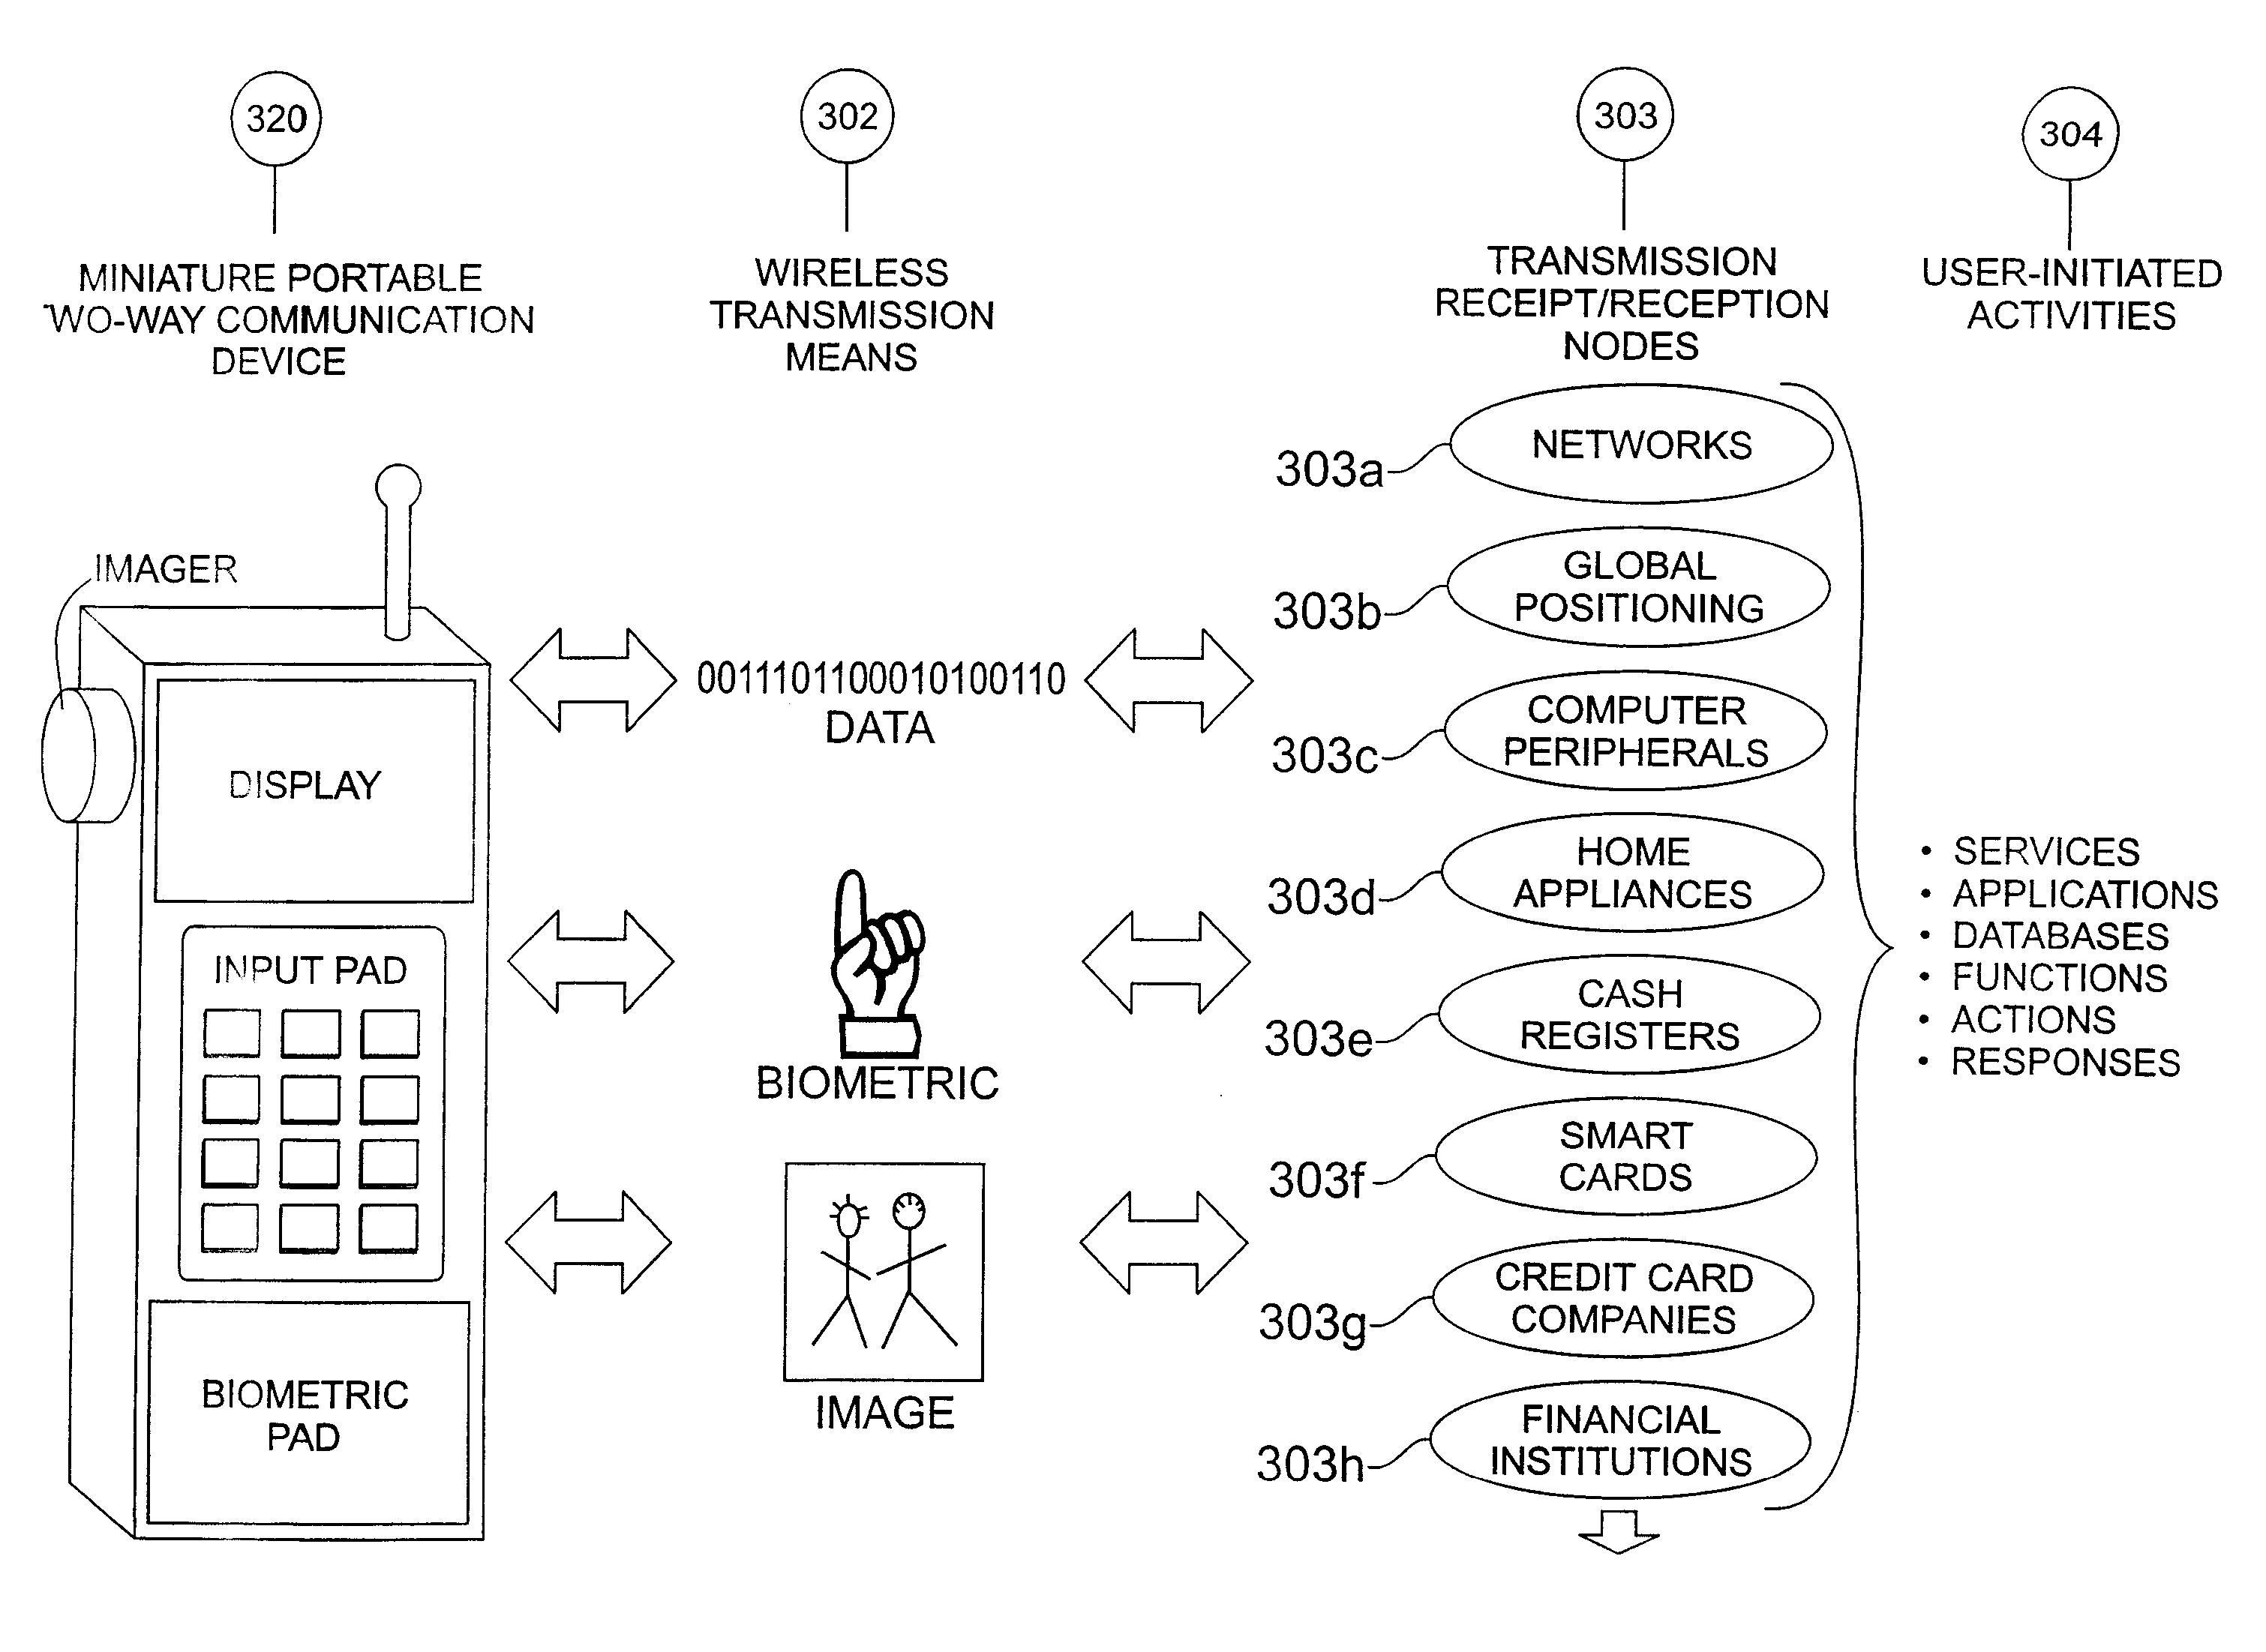 A system and architecture that supports a multi-function semiconductor device between networks and portable wireless communications products